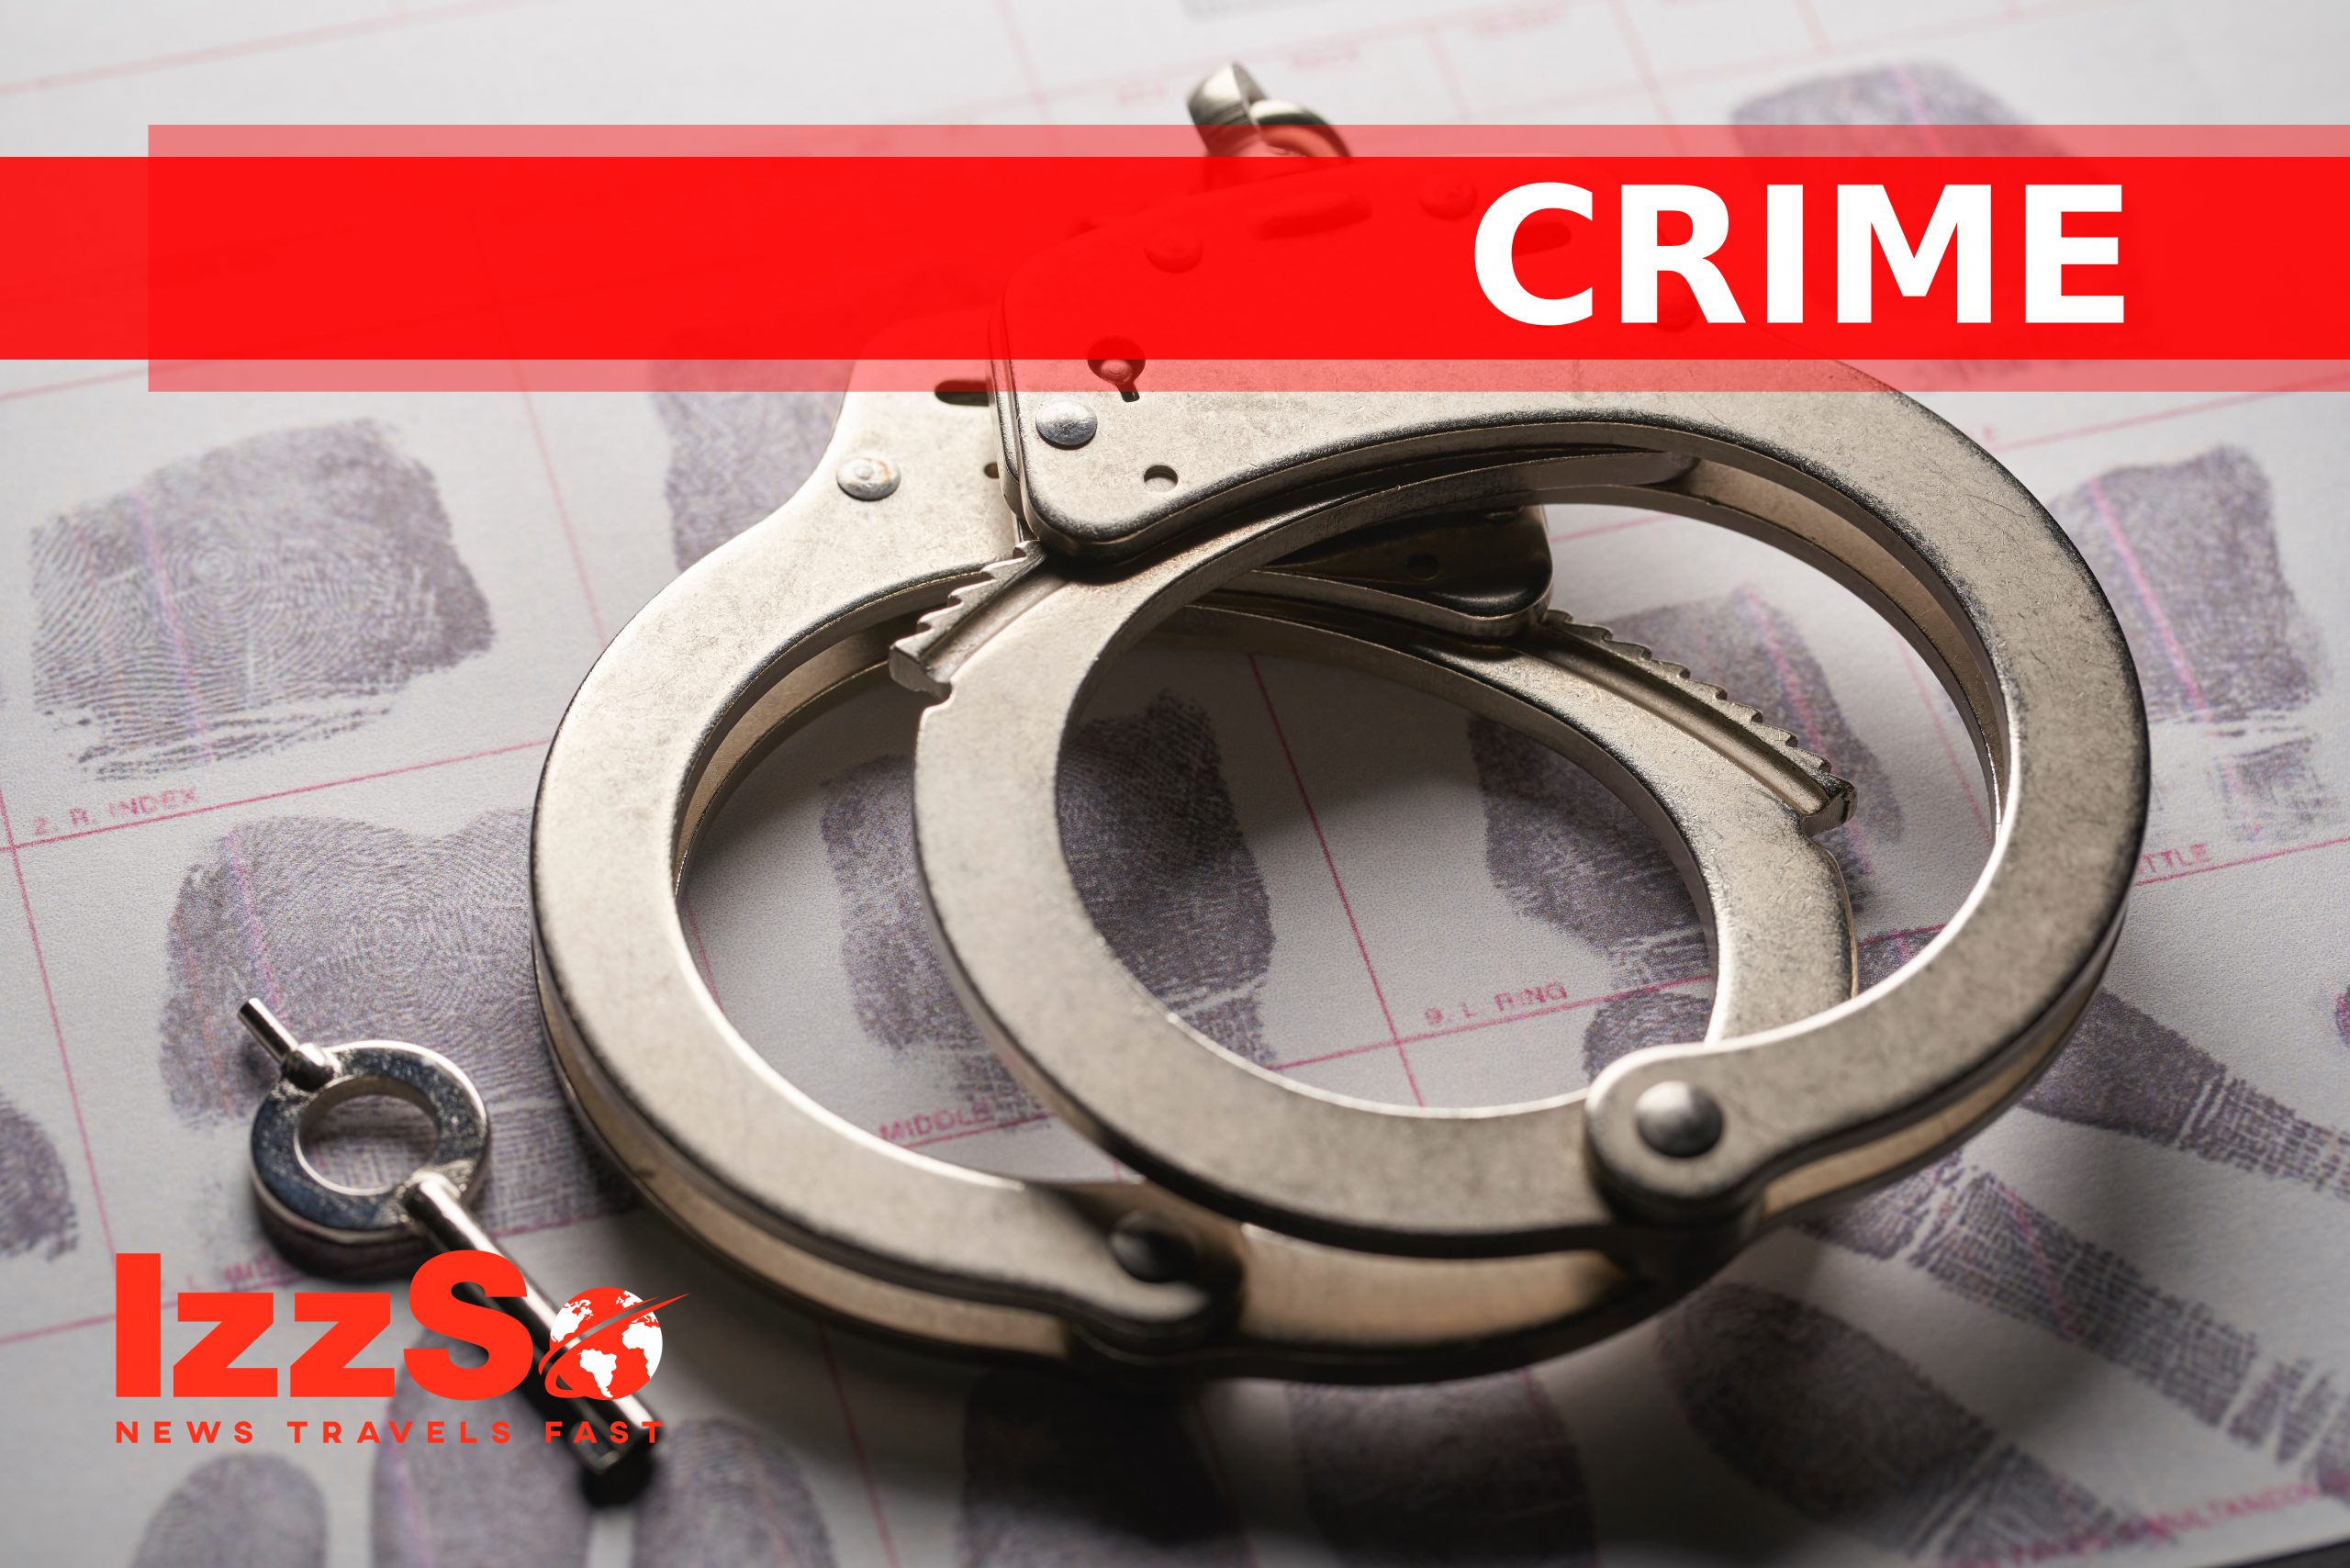 63-year-old Moruga man charged with one count of sexual touching 14 year old boy yesterday